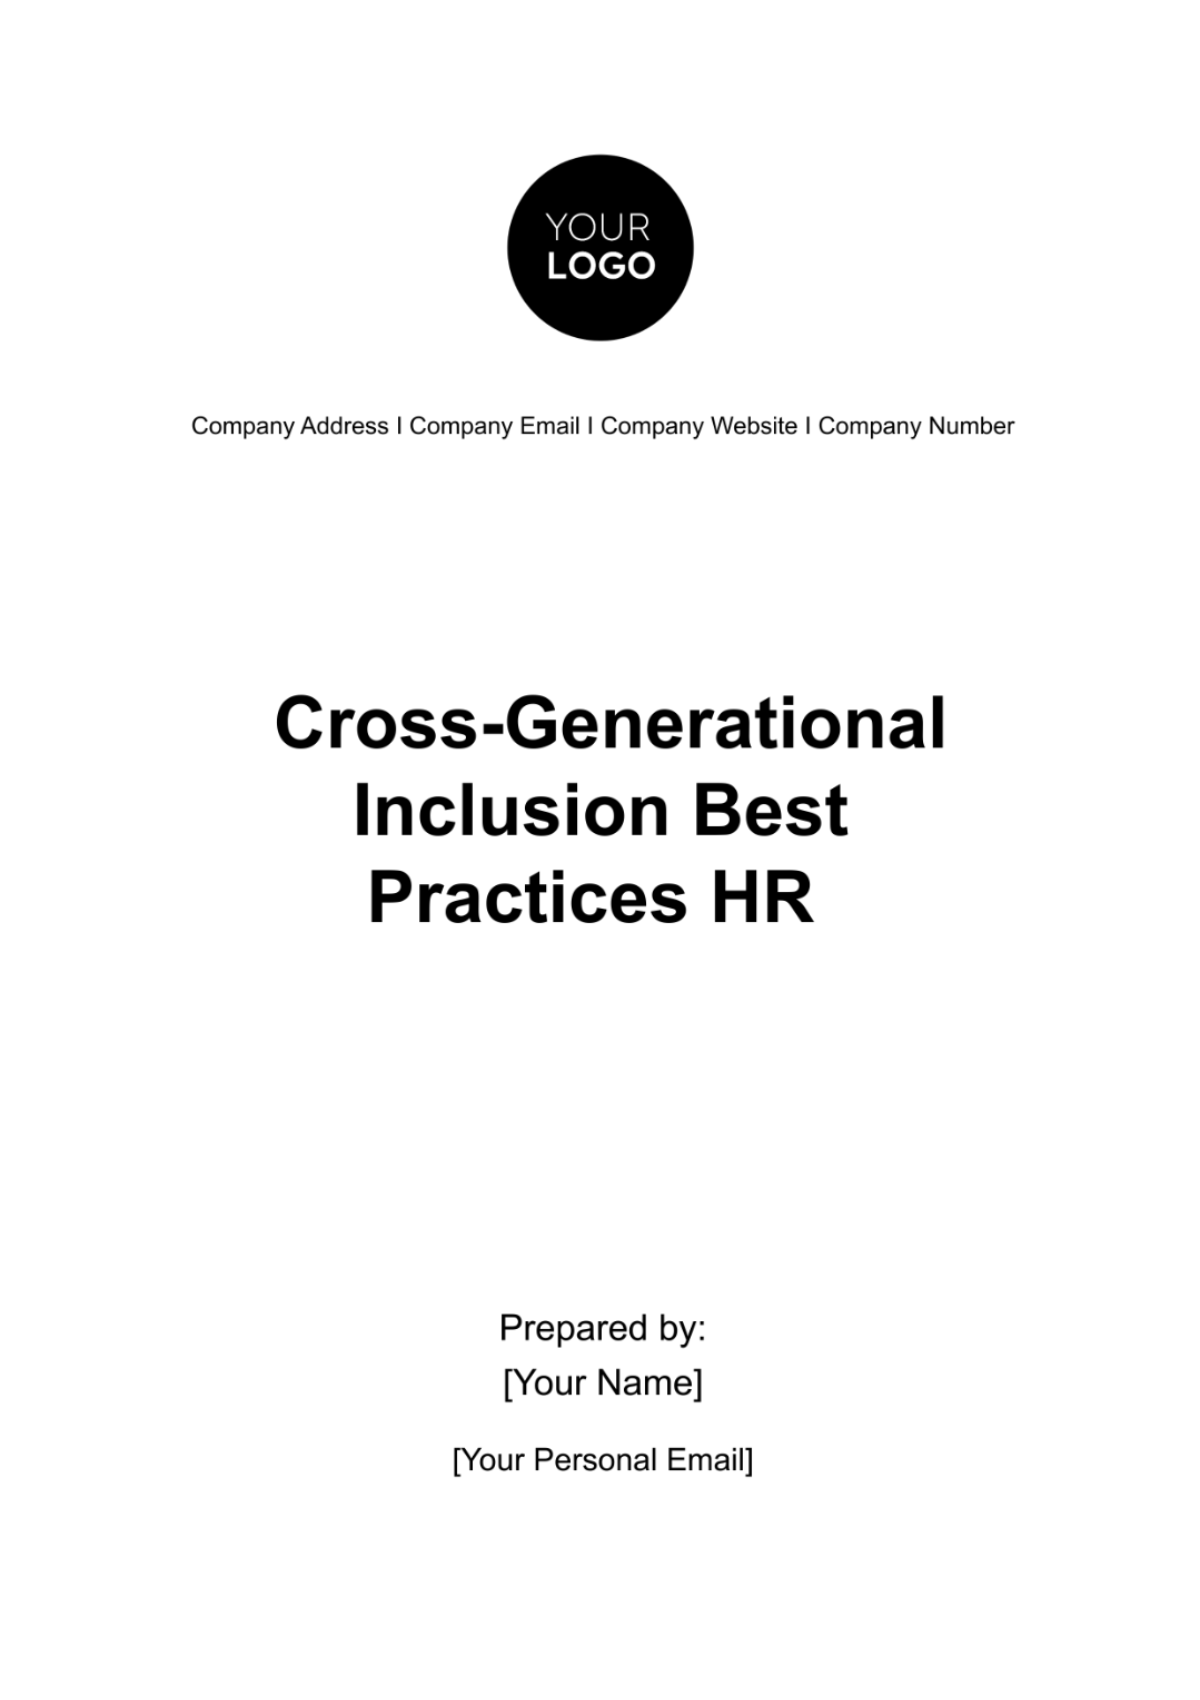 Cross-Generational Inclusion Best Practices HR Template